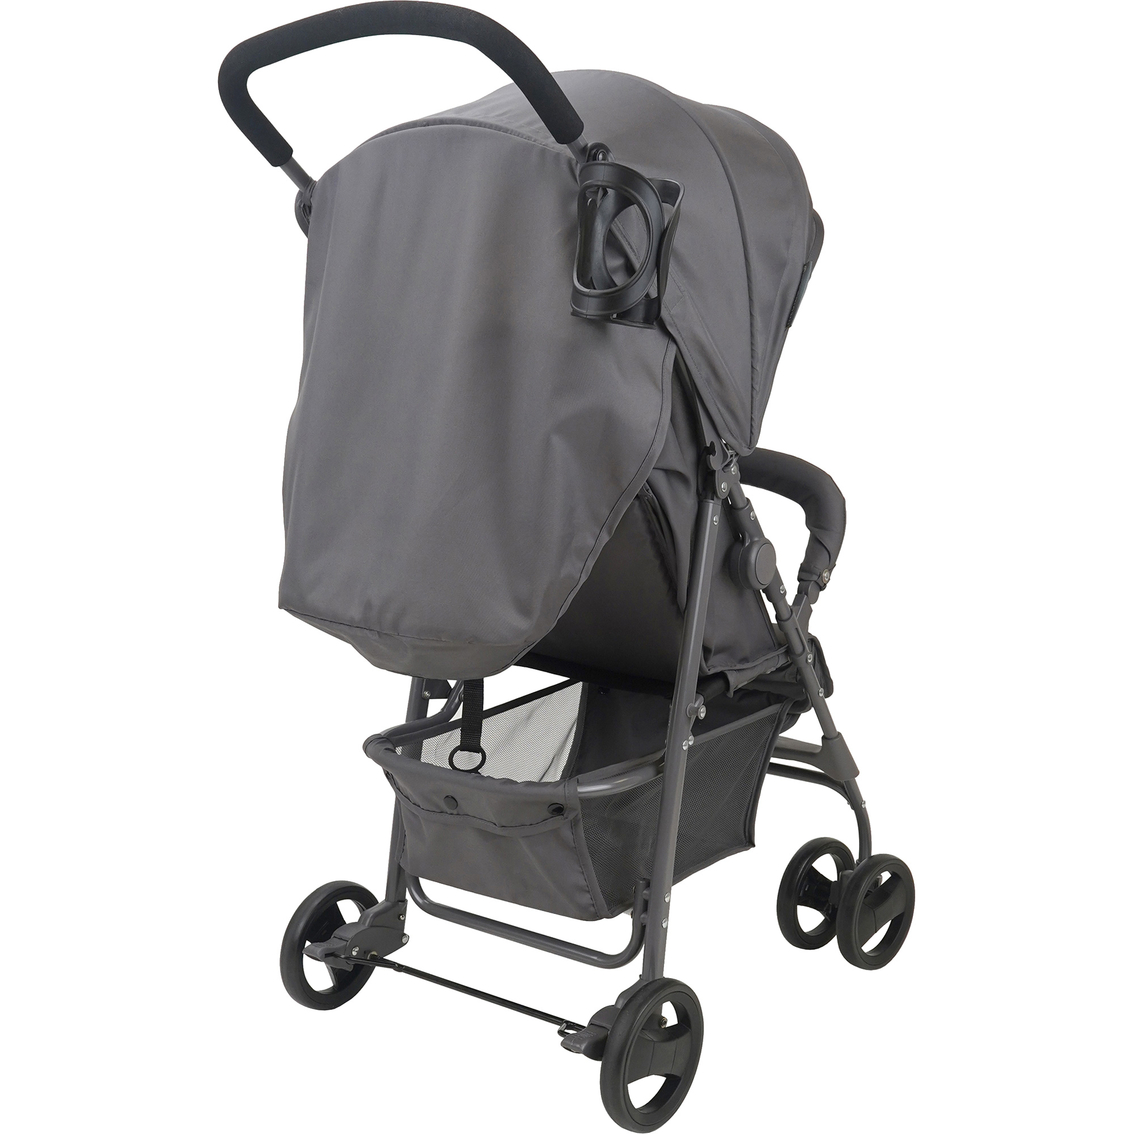 Shopee Lightweight Stroller with Extra Large Canopy - Image 2 of 5